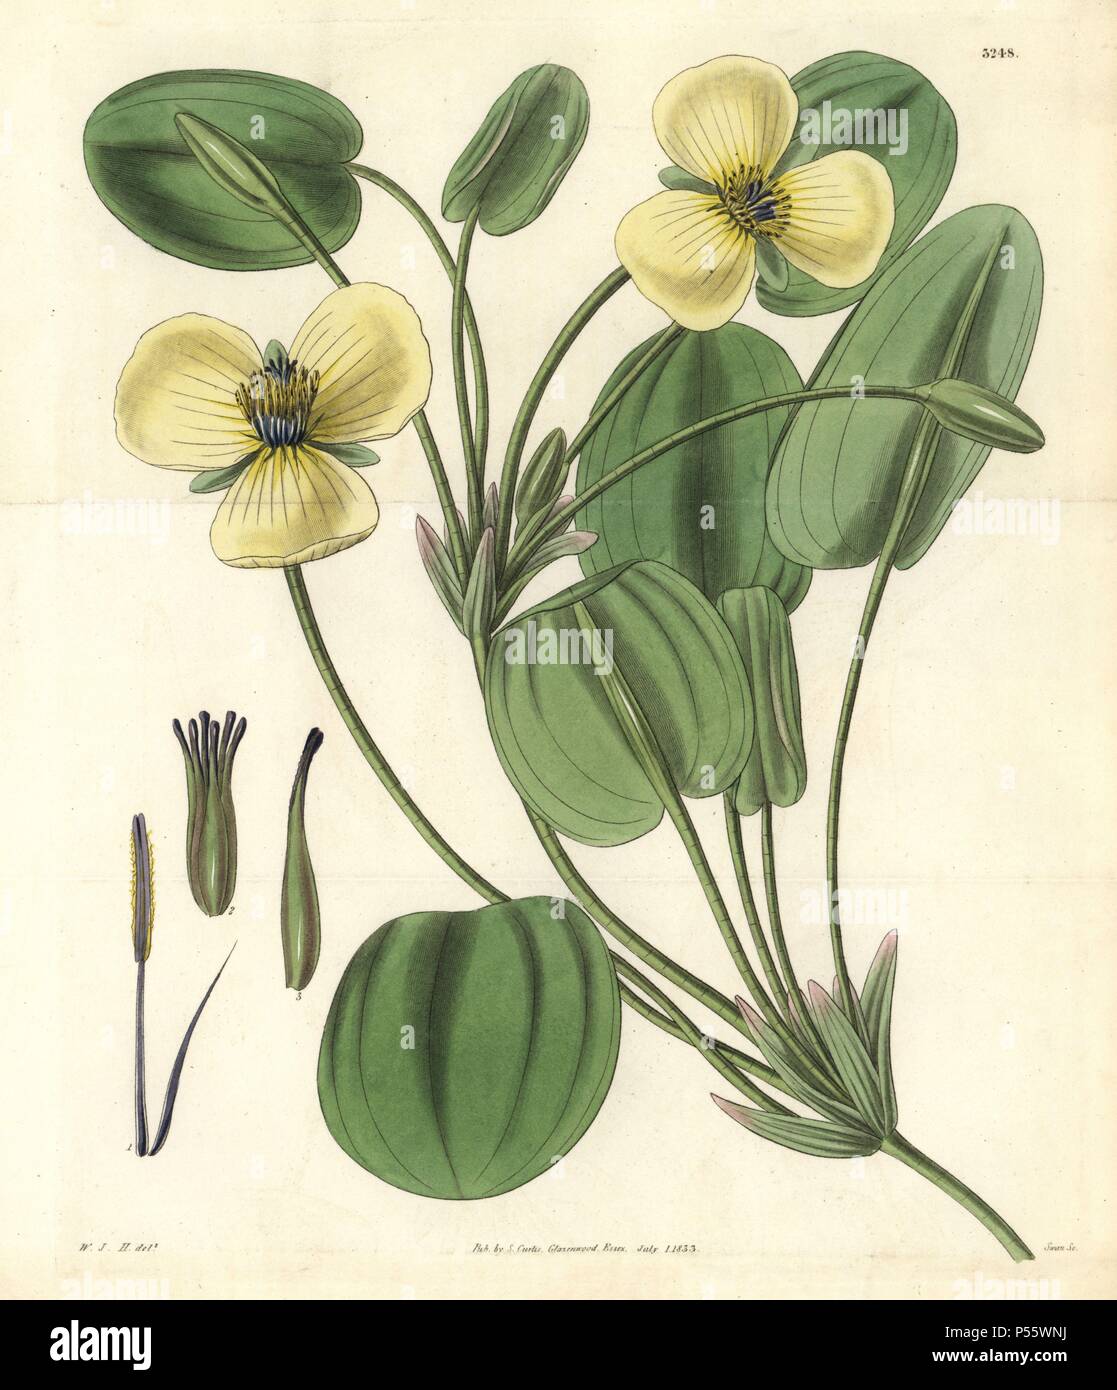 Humboldt's limnocharis or water poppy, Limnocharis humboldtii or Hydrocleys nymphoides. Illustration drawn by William Jackson Hooker, engraved by Swan. Handcolored copperplate engraving from William Curtis's 'The Botanical Magazine,' Samuel Curtis, 1833. Hooker (1785-1865) was an English botanist, writer and artist. He was Regius Professor of Botany at Glasgow University, and editor of Curtis' 'Botanical Magazine' from 1827 to 1865. In 1841, he was appointed director of the Royal Botanic Gardens at Kew, and was succeeded by his son Joseph Dalton. Hooker documented the fern and orchid crazes th Stock Photo